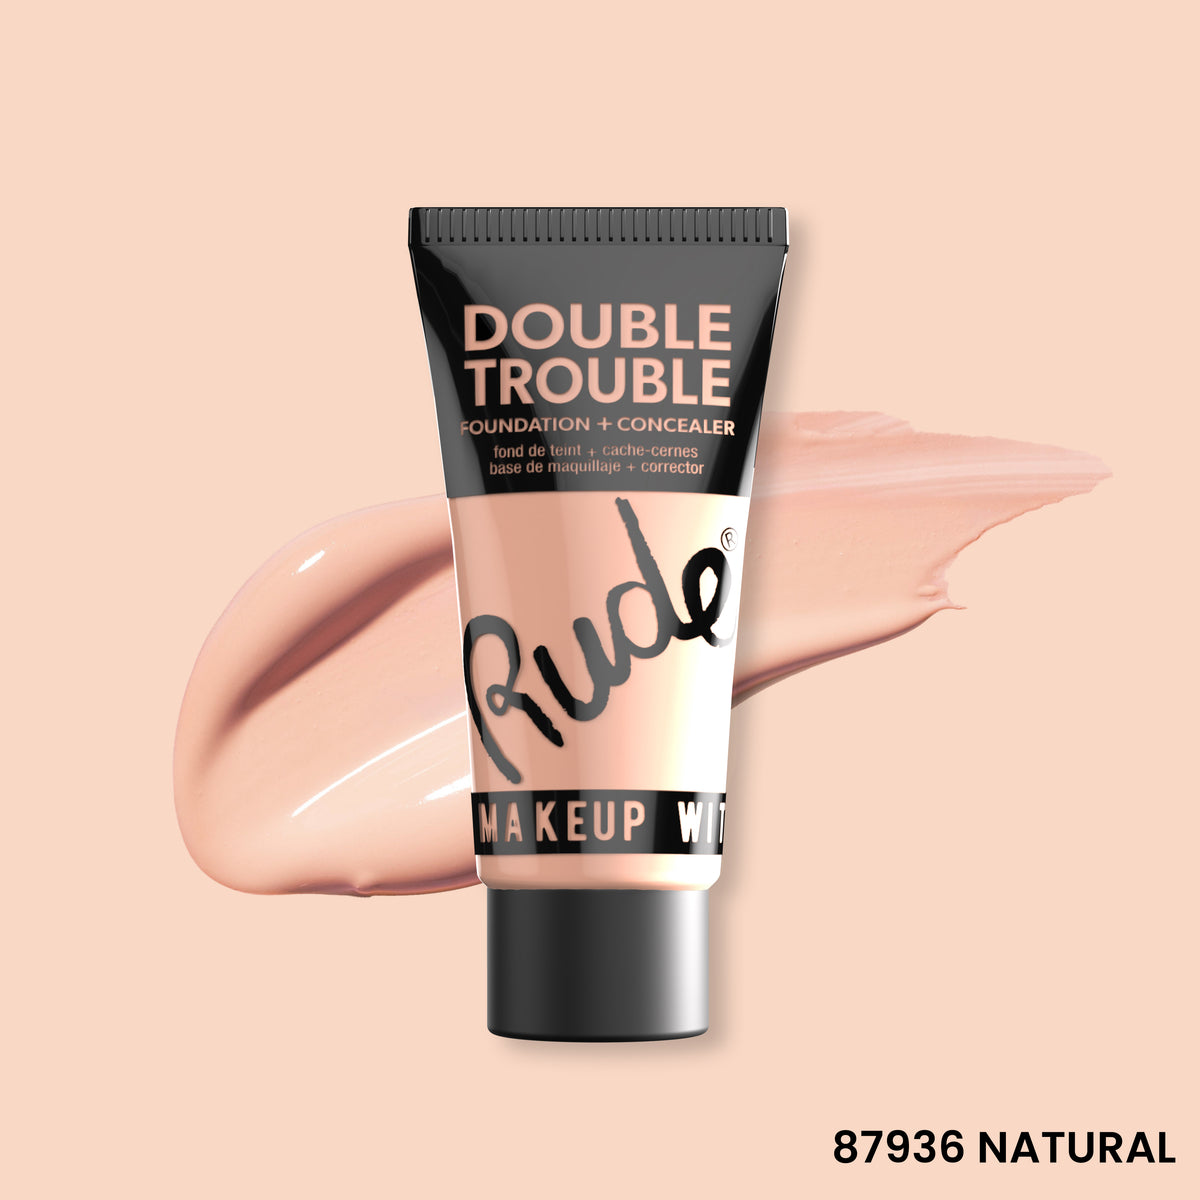 Double Trouble Foundation and Concealer